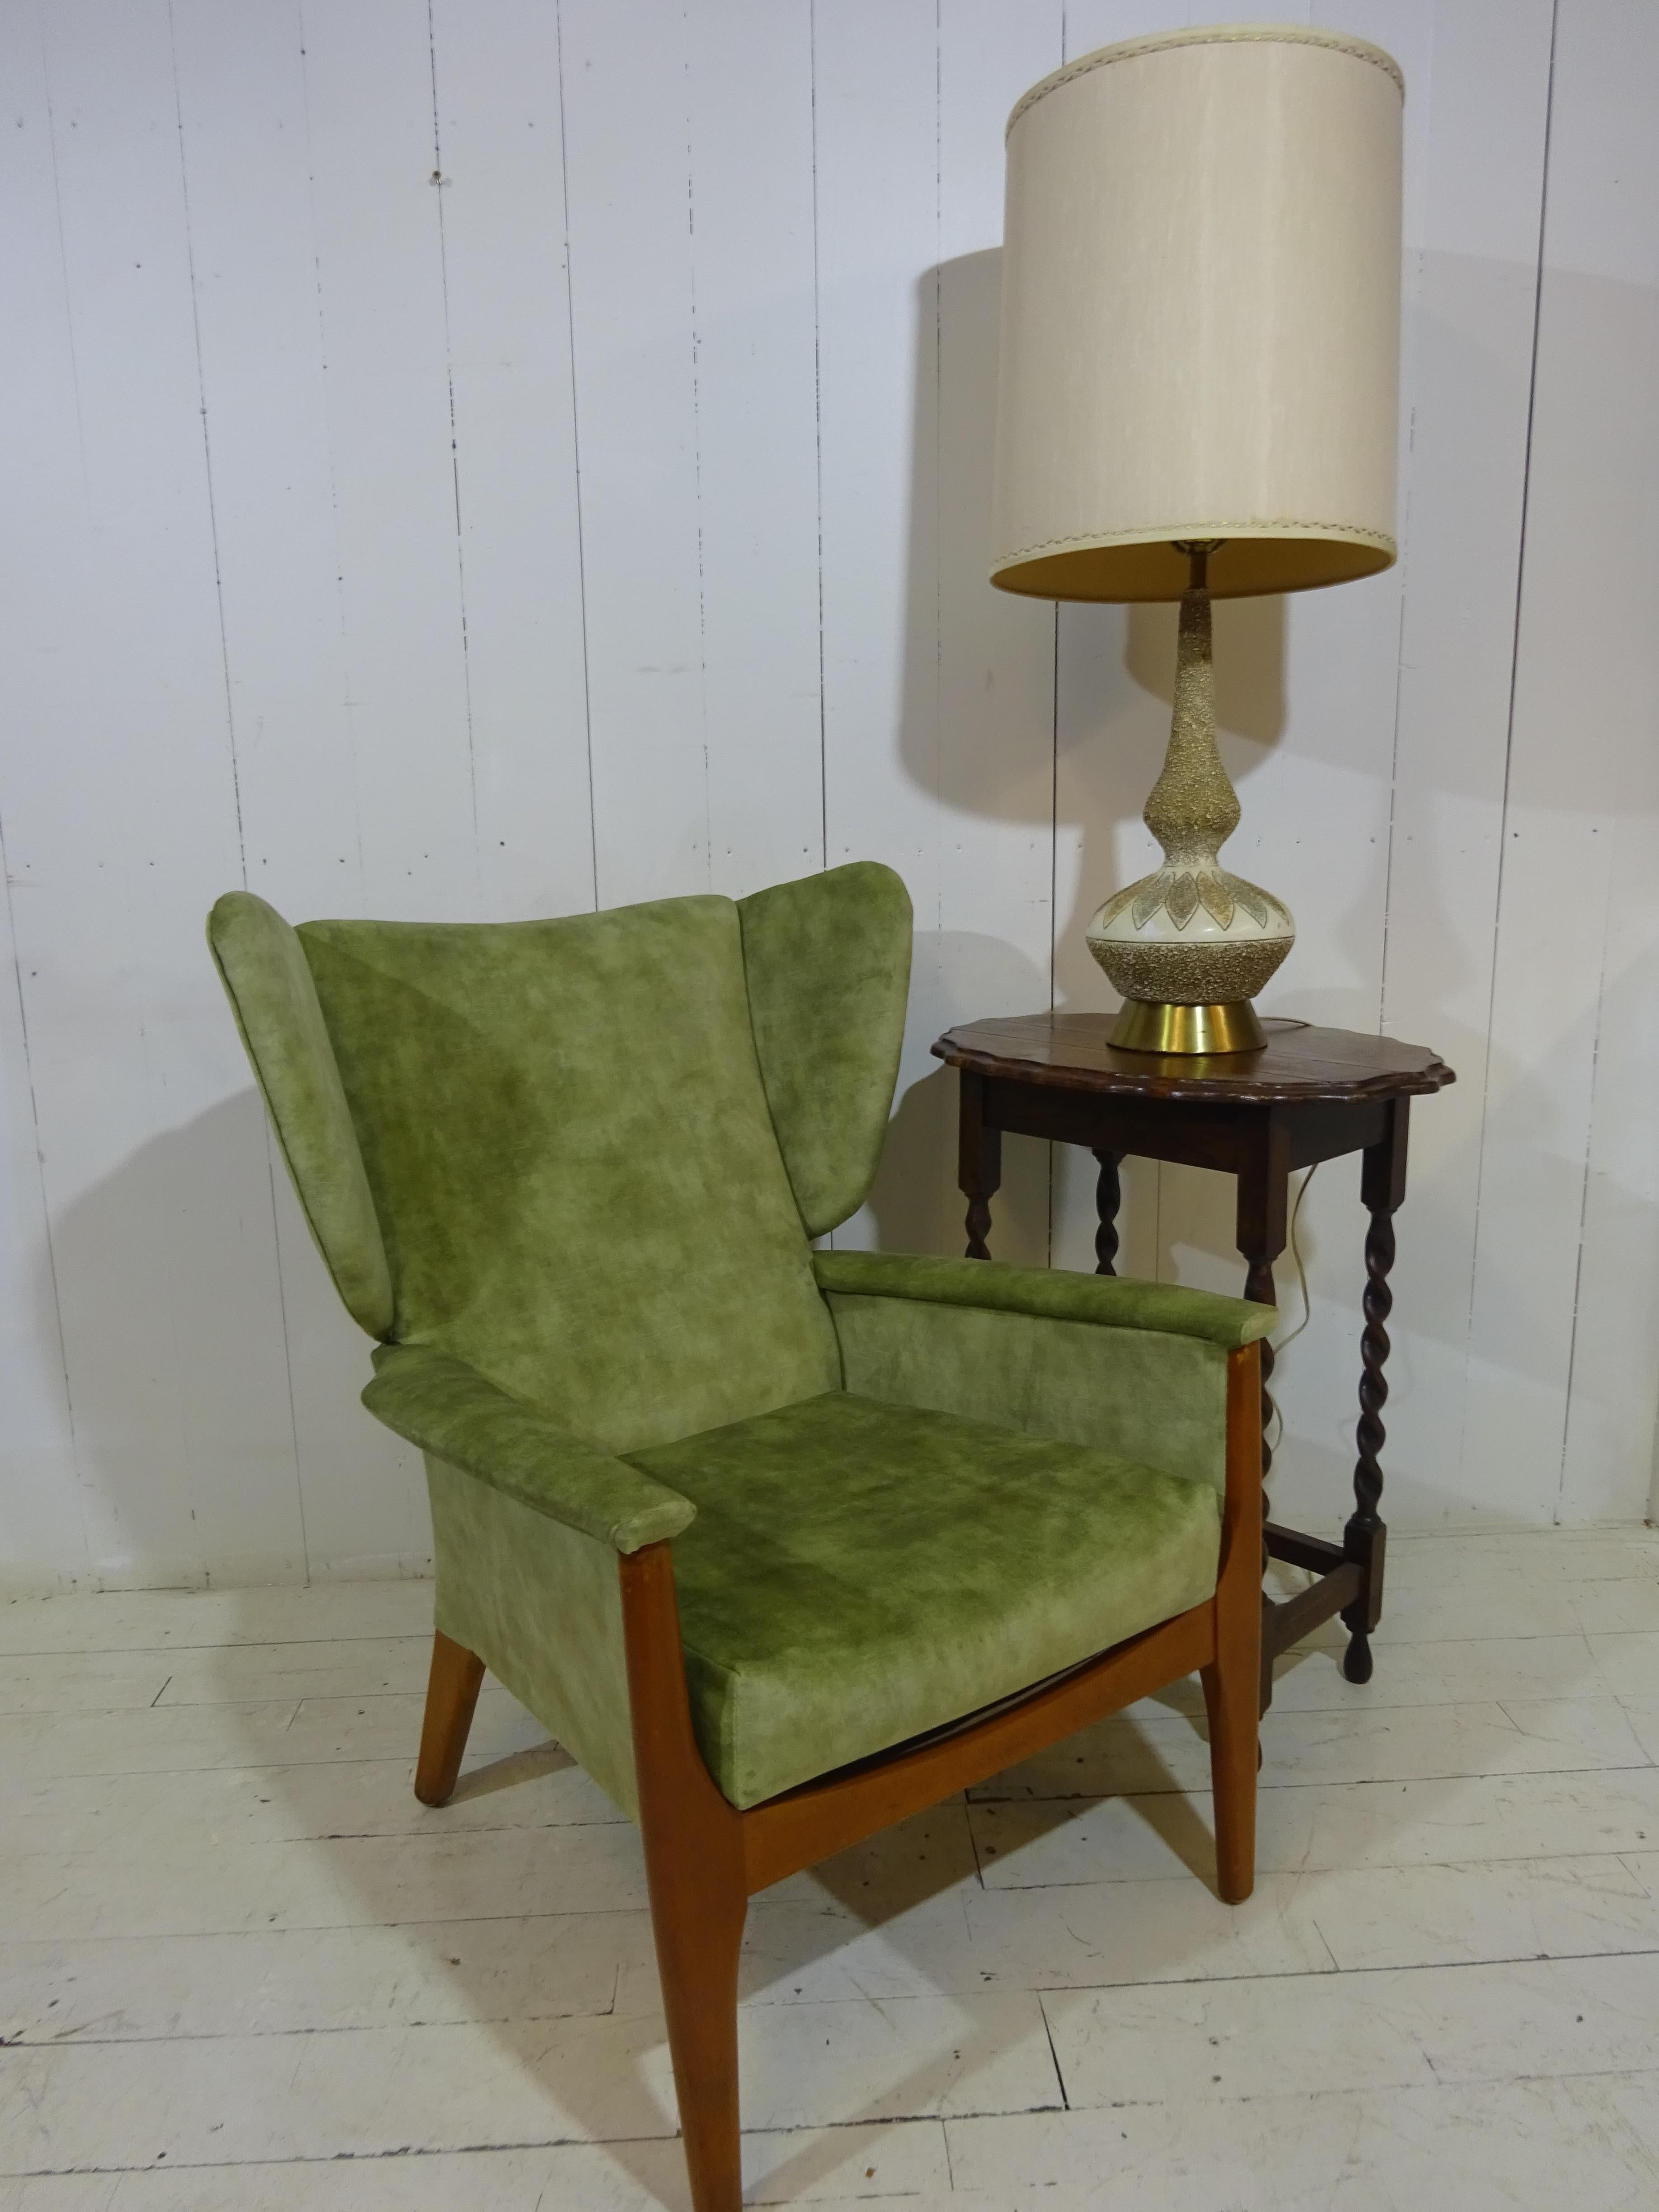 Wingback armchair

Superb chair from British manufacturers Parker Knoll, this is the famous PK 988 model. 

Parker Knoll is a British furniture manufacturing company, formed in 1931 by British furniture manufacturer Frederick Parker and Willi